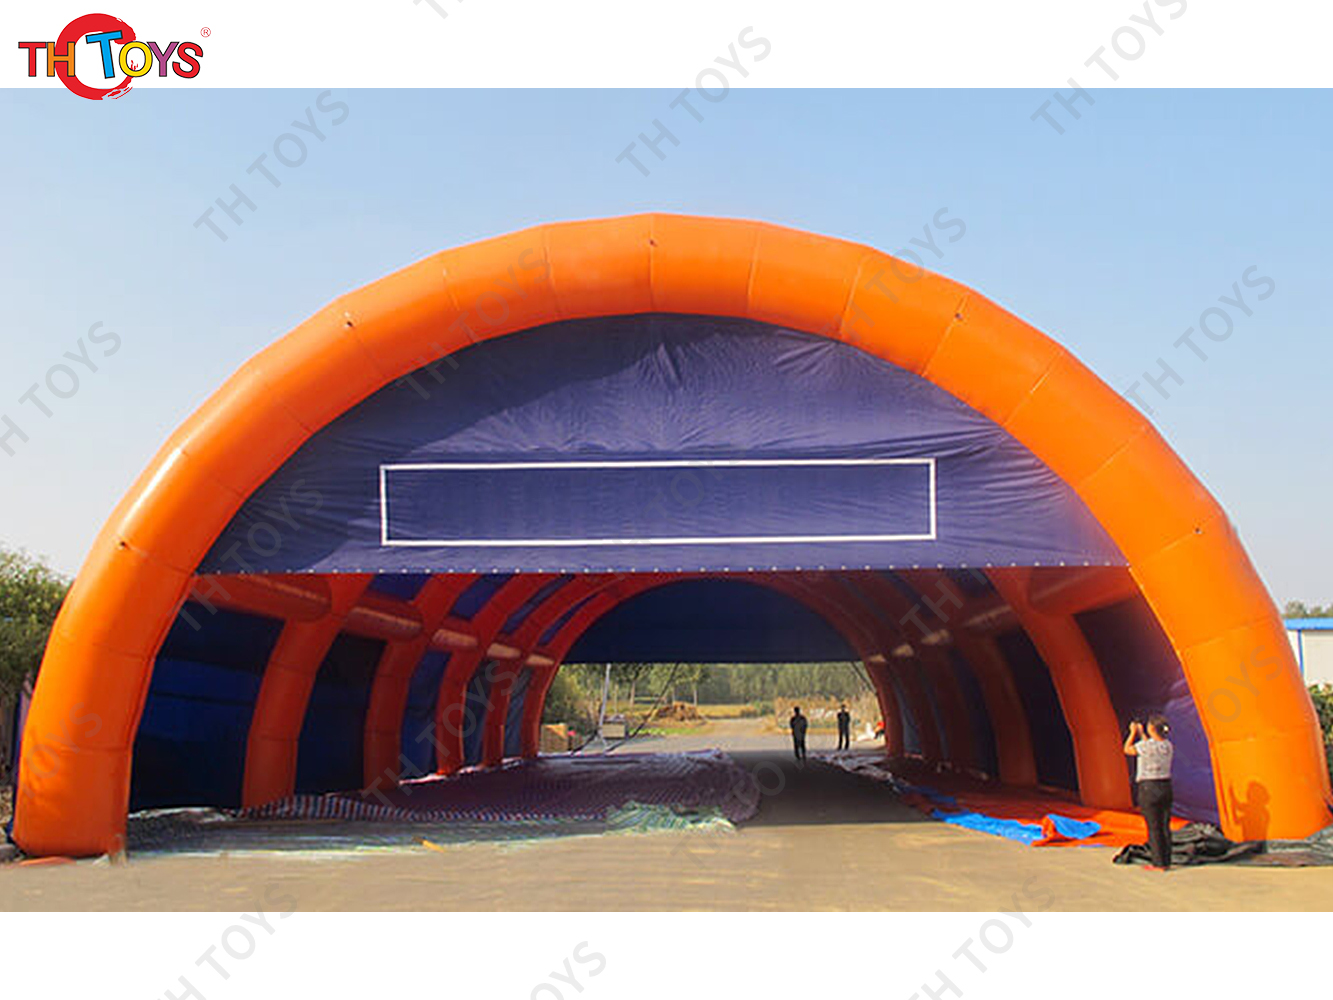 30x15x8m outdoor super big inflatable tent,durable inflatable tent for cs game,tennis sport games arena